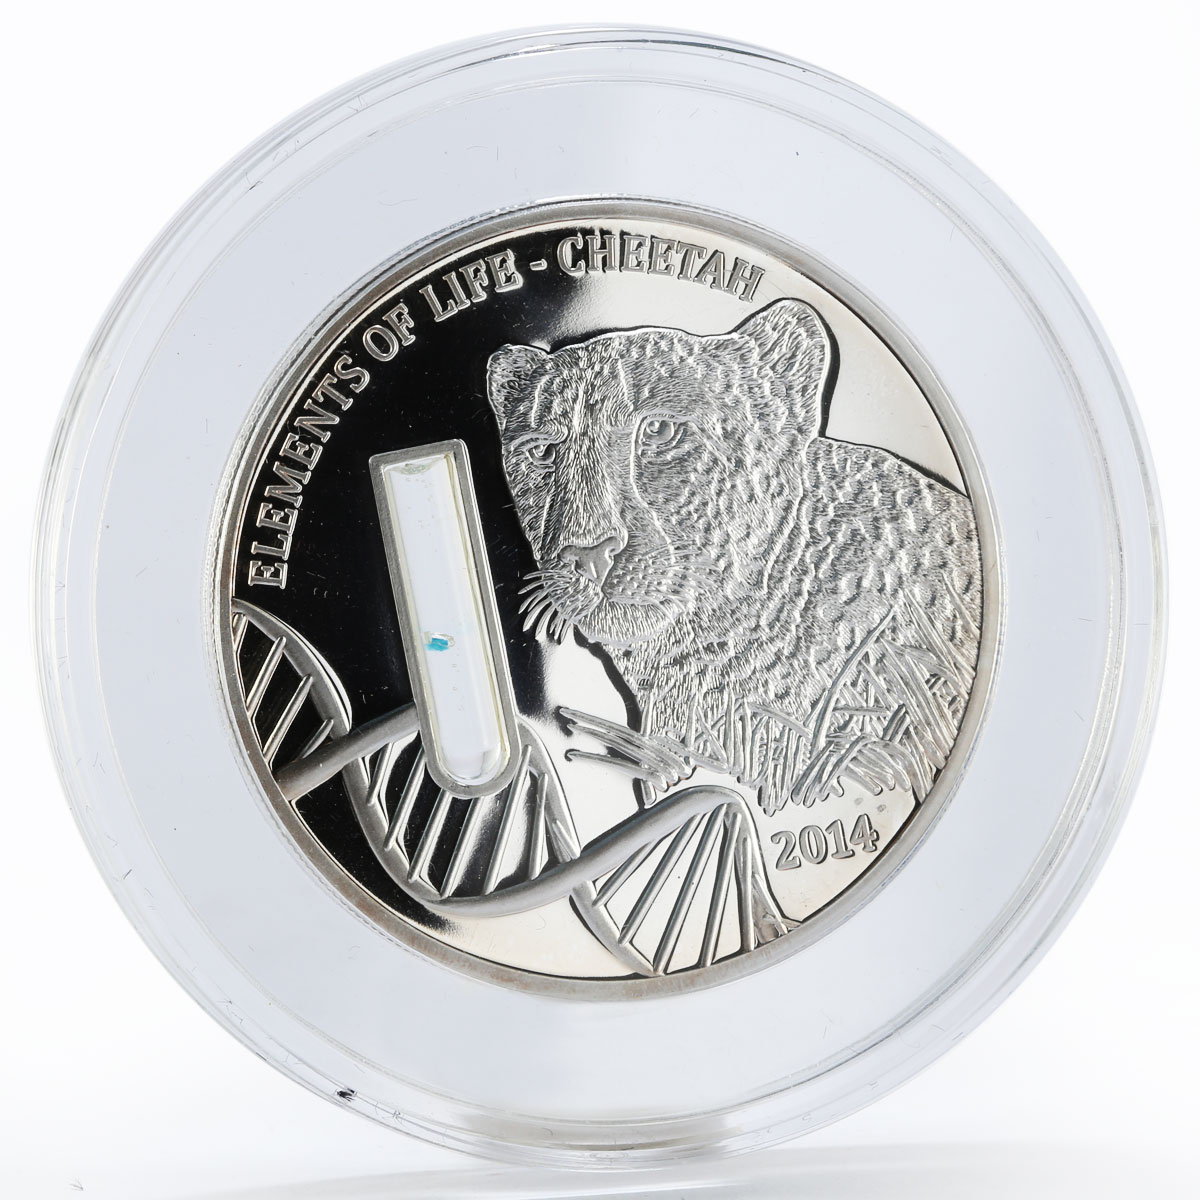 Congo 2000 francs Elements of Life Cheetah DNA Fial proof silver coin 2014